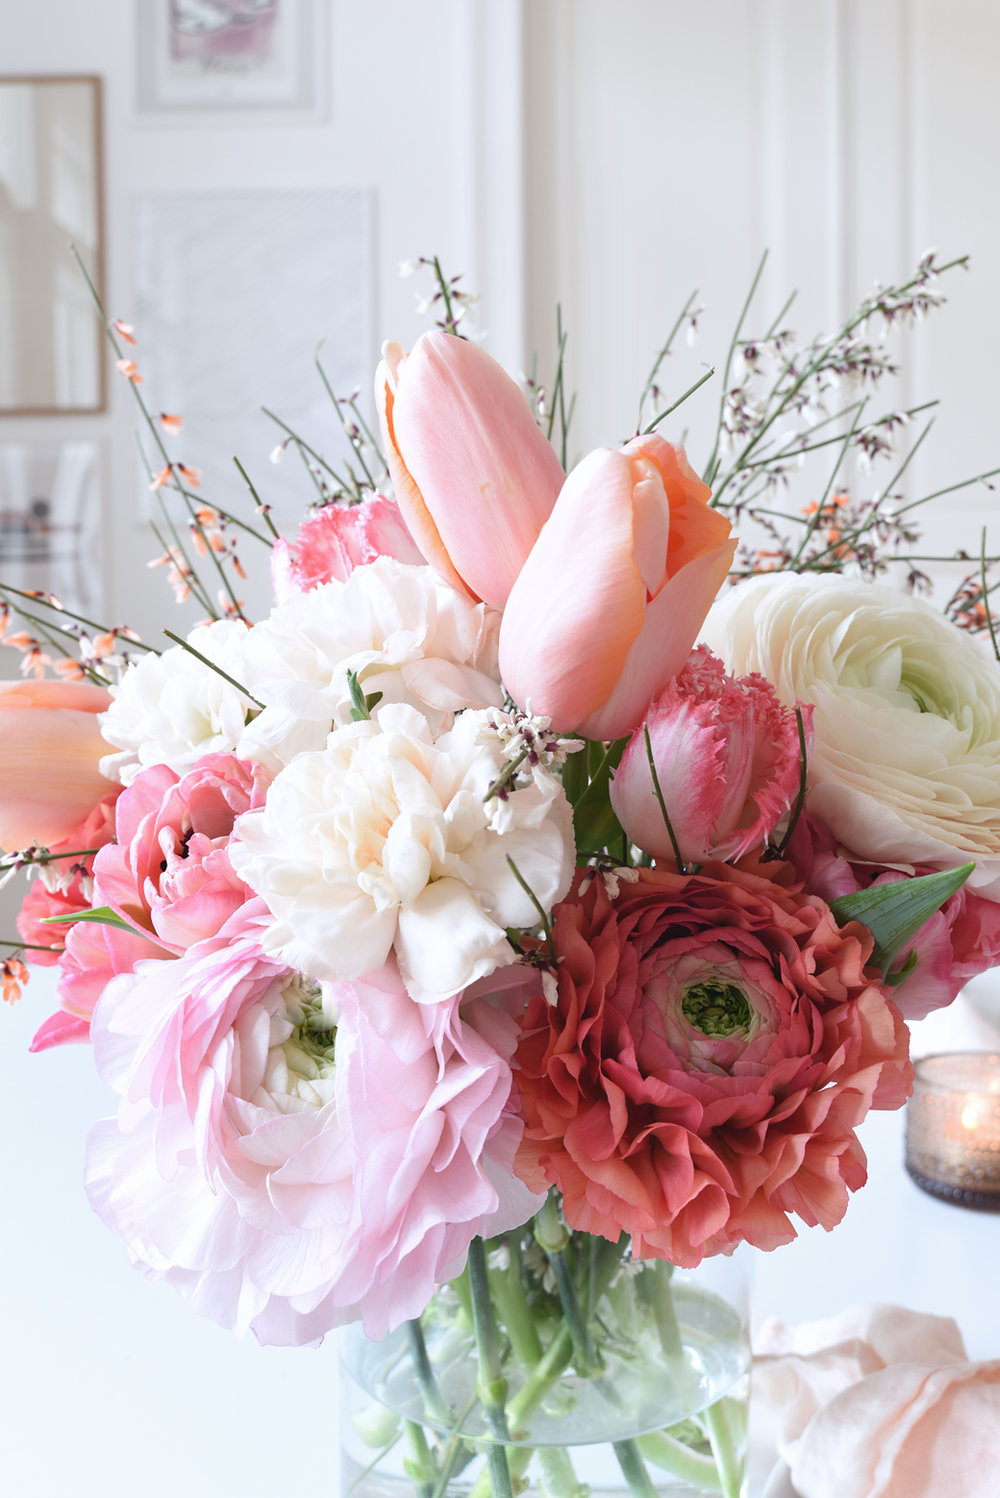 March Dinner Party Inspiration With Pale Salmon + Fresh Flowers